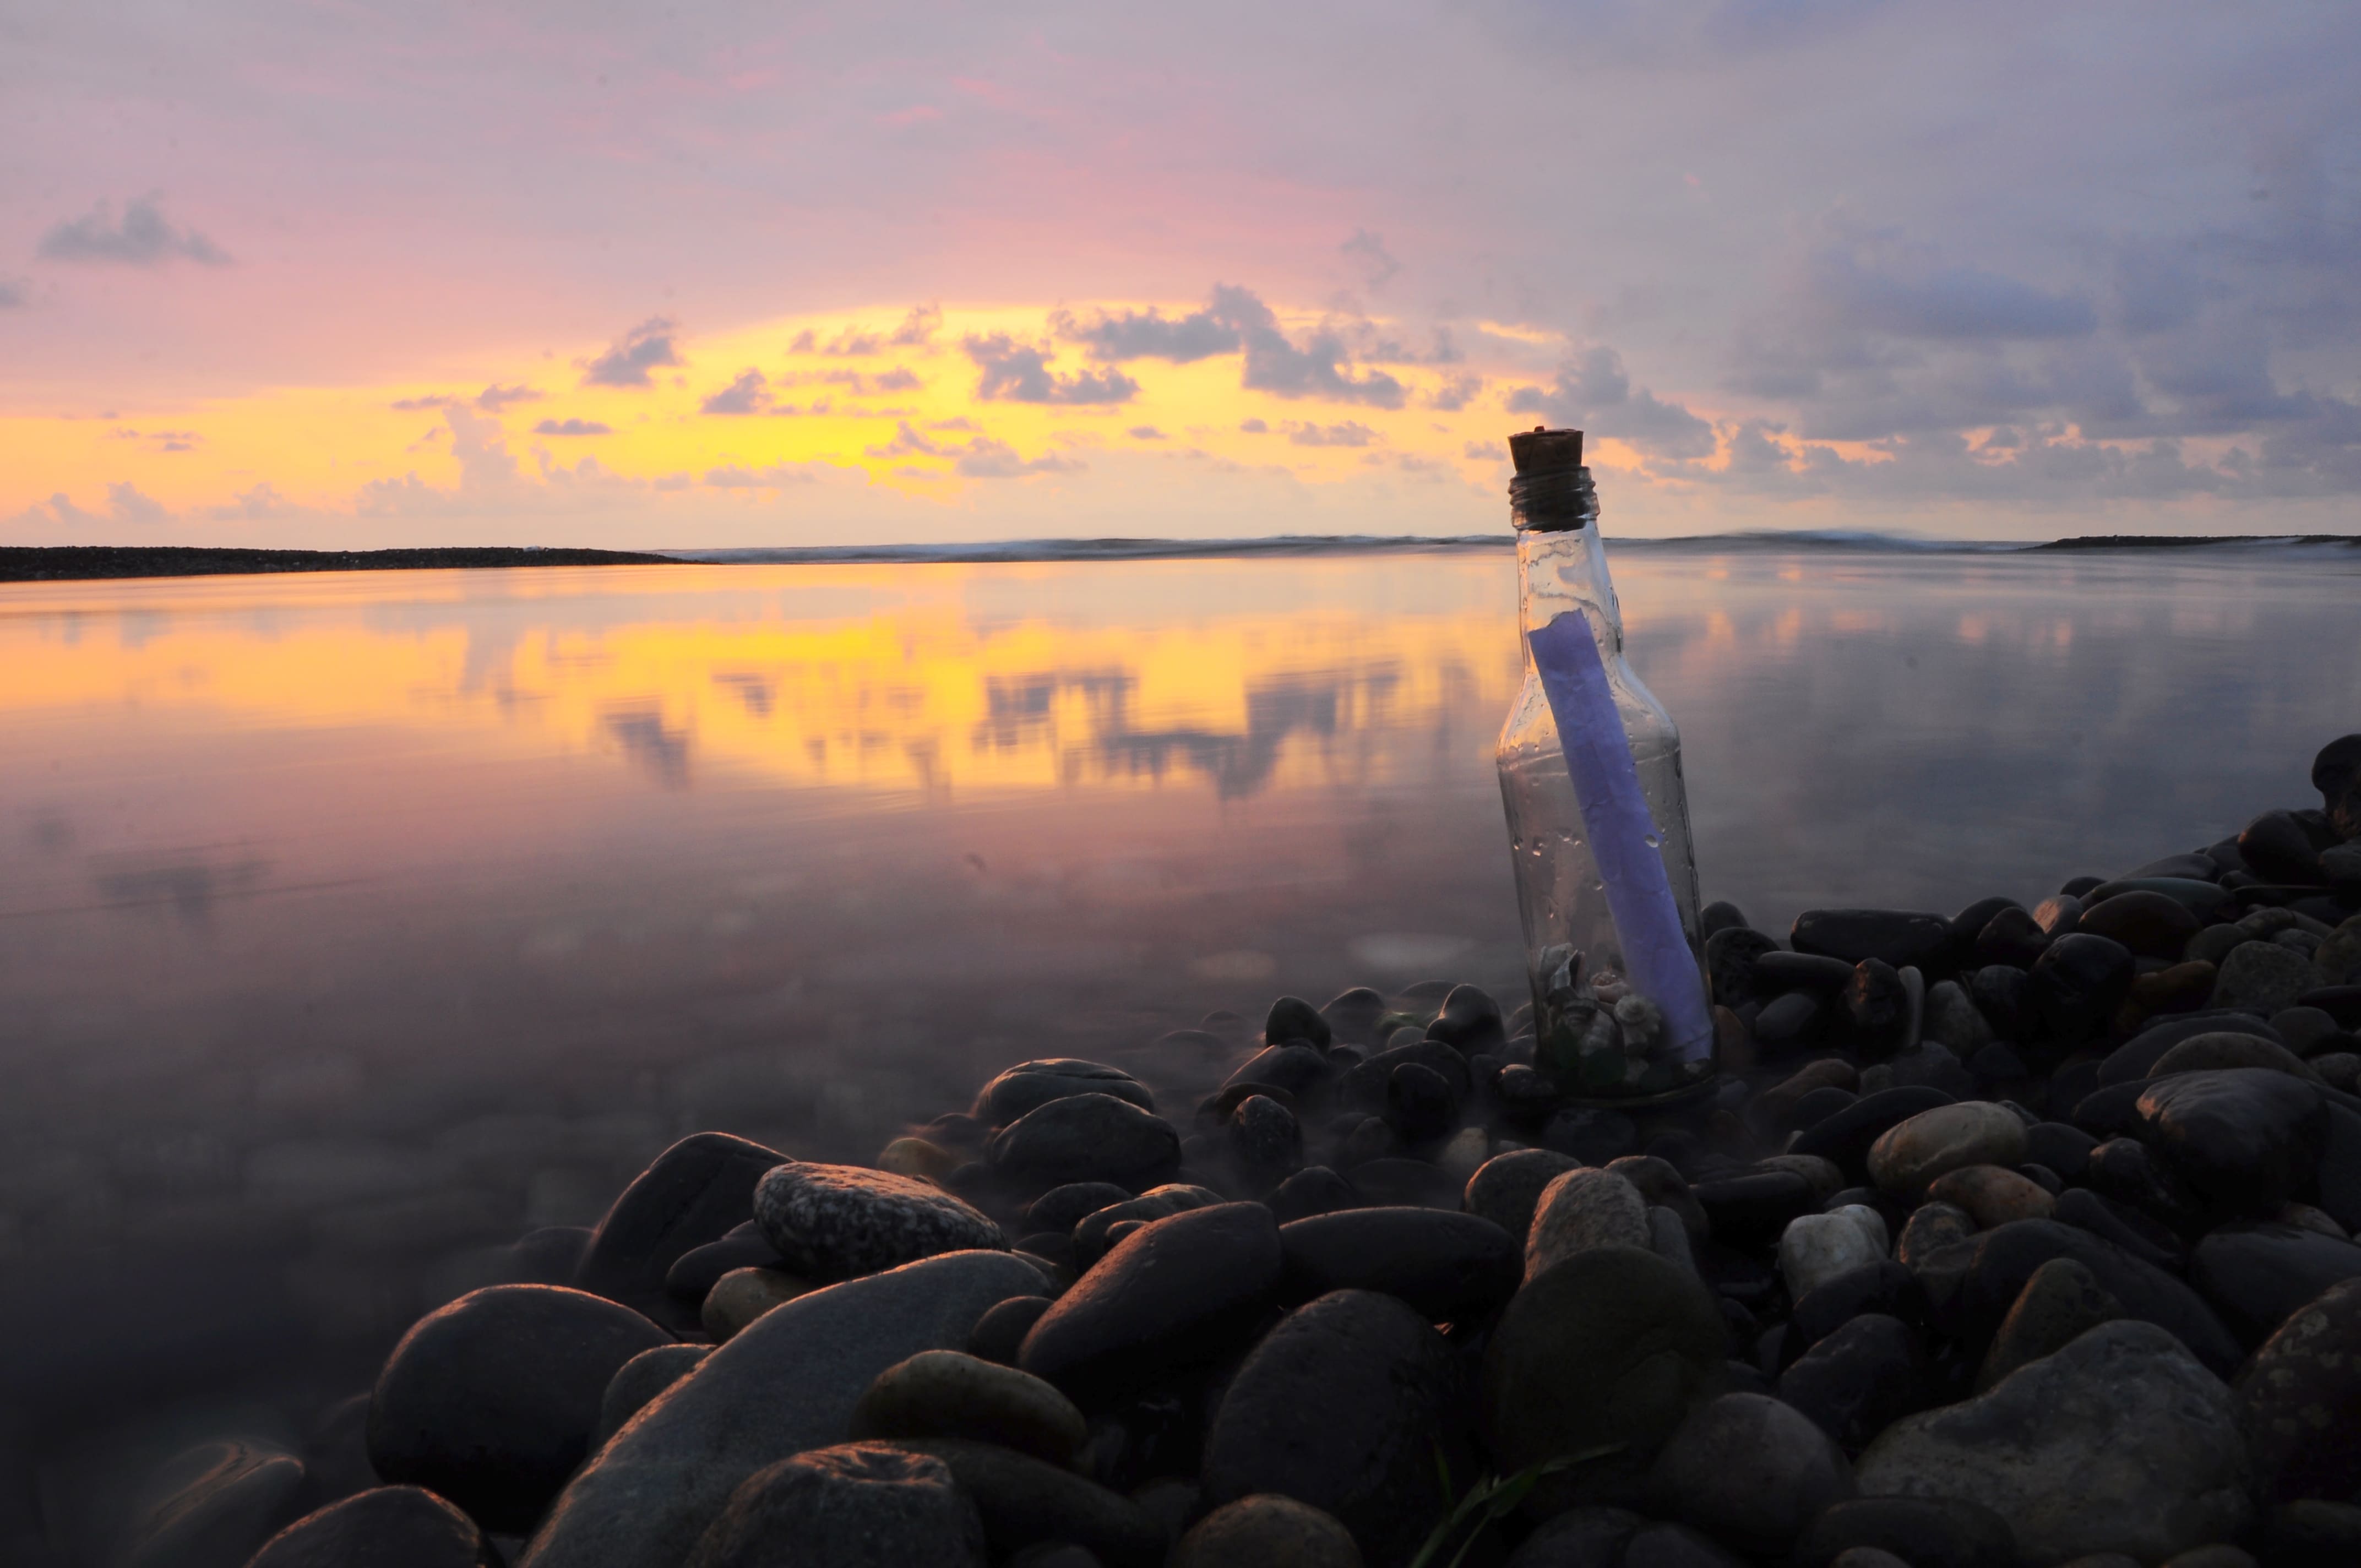 Rocky beach with a message in a bottle